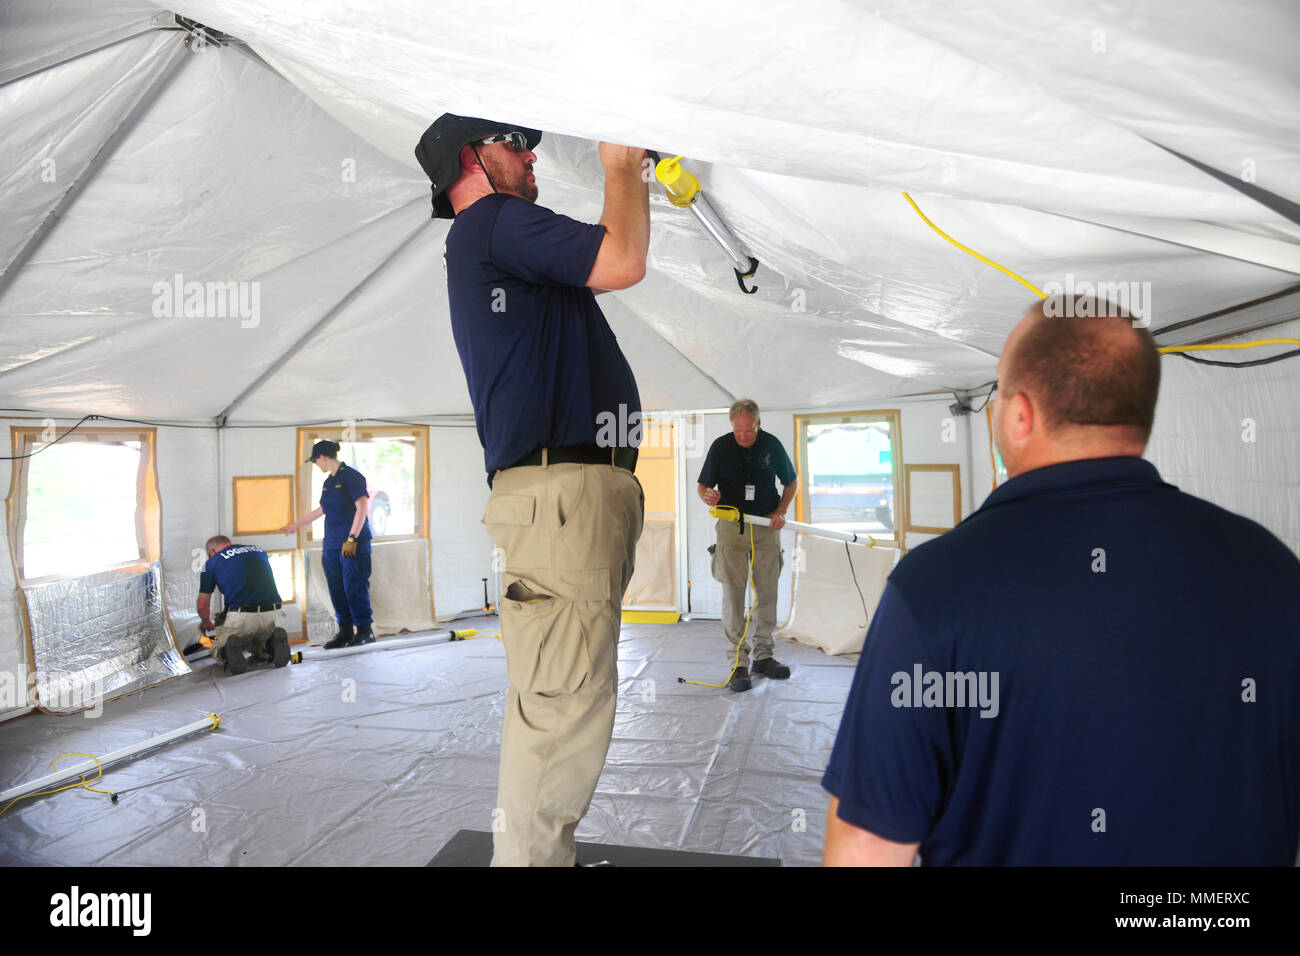 VIEQUES, Puerto Rico – Joshua Gore, U.S. Department of Health and Human  Services logistics, installs lighting inside a Western Shelter tent being  erected outside the Puerto Rican island-municipality of Vieques' sole  hospital